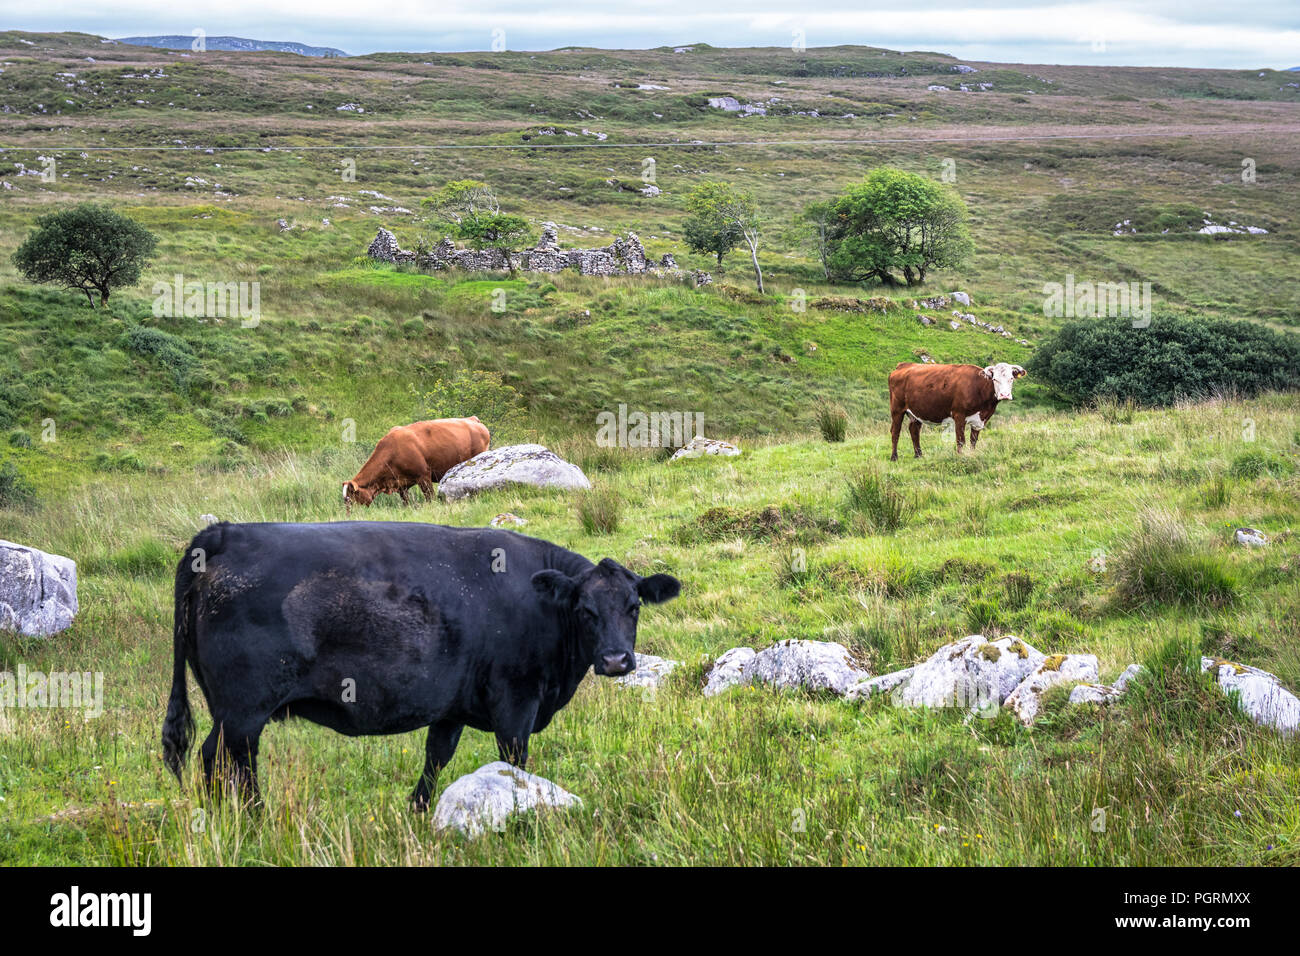 This is a piture of cows grazing in the open mountain landscape. It was taken in Donegal Ireland.  In the distance is the ruins of an old Famine cotta Stock Photo